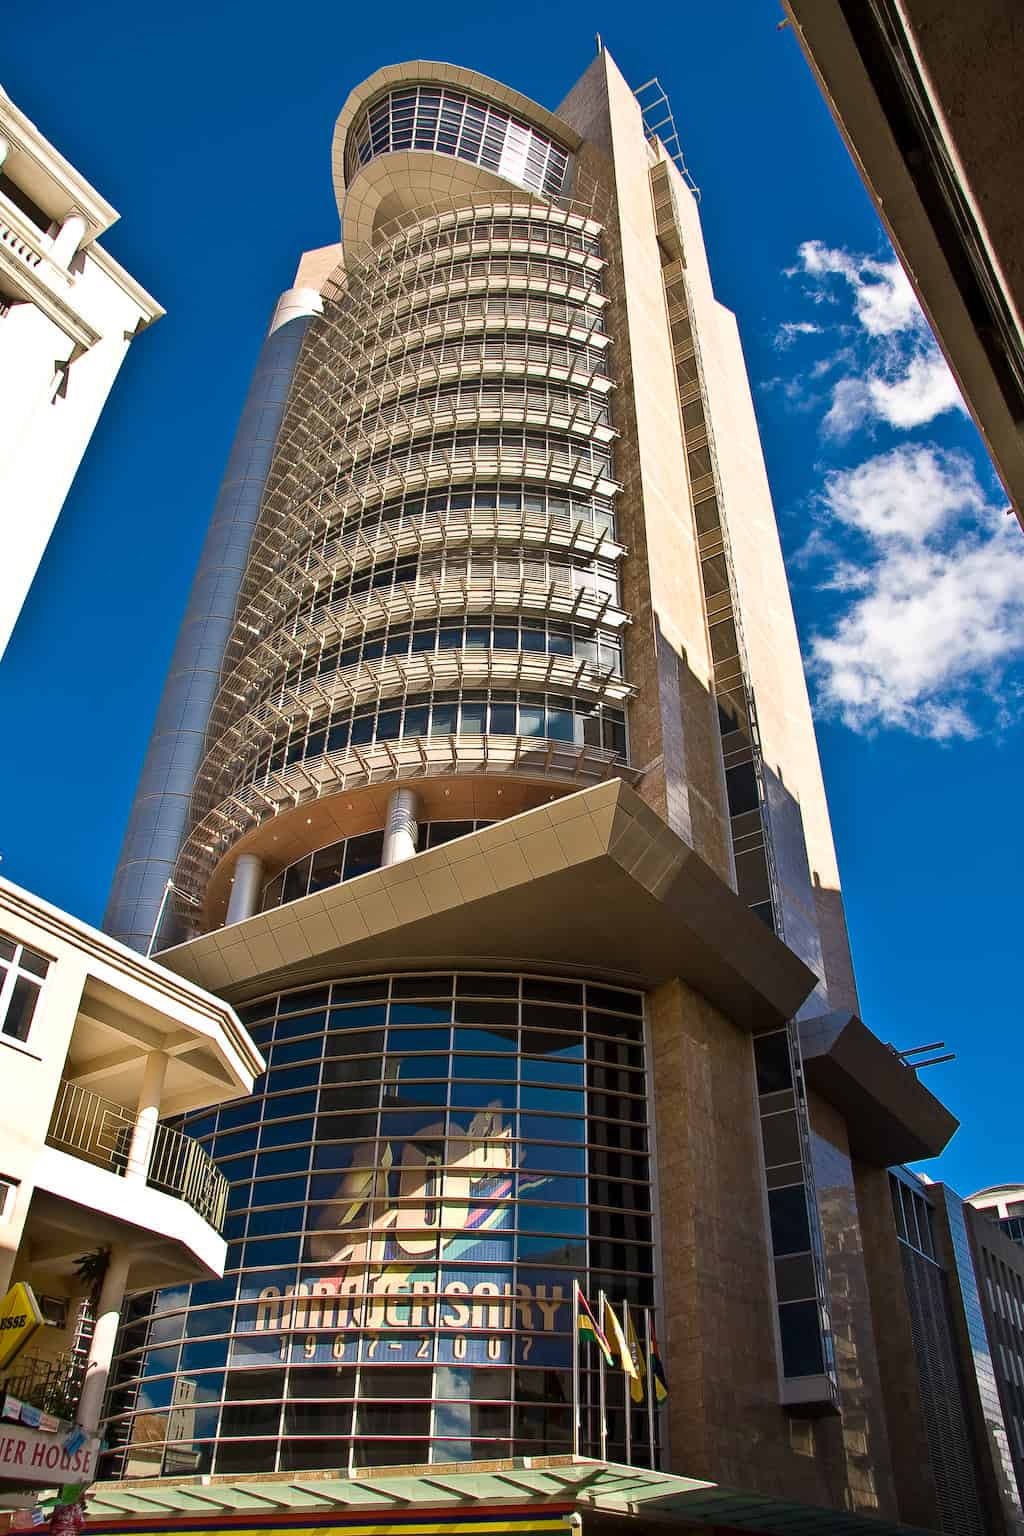 Central bank of Mauritius